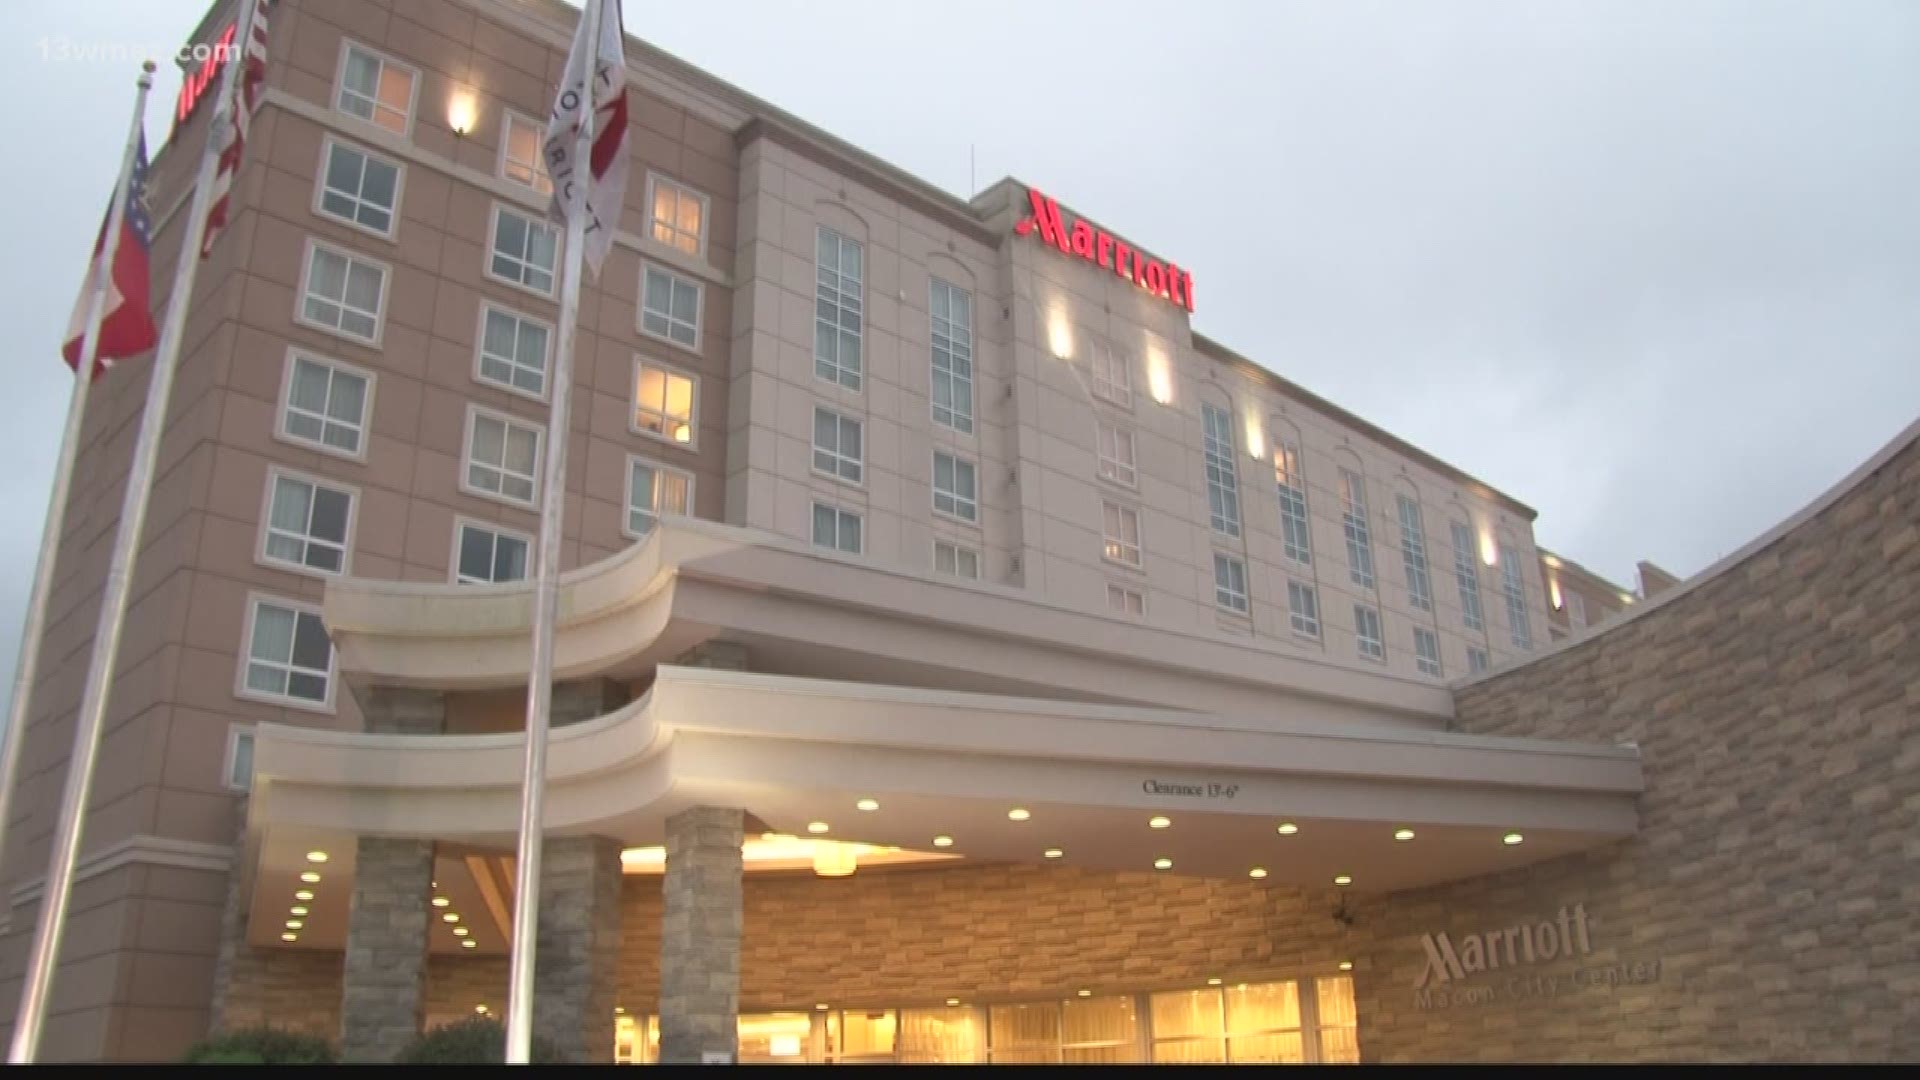 Macon Marriott announces change of ownership